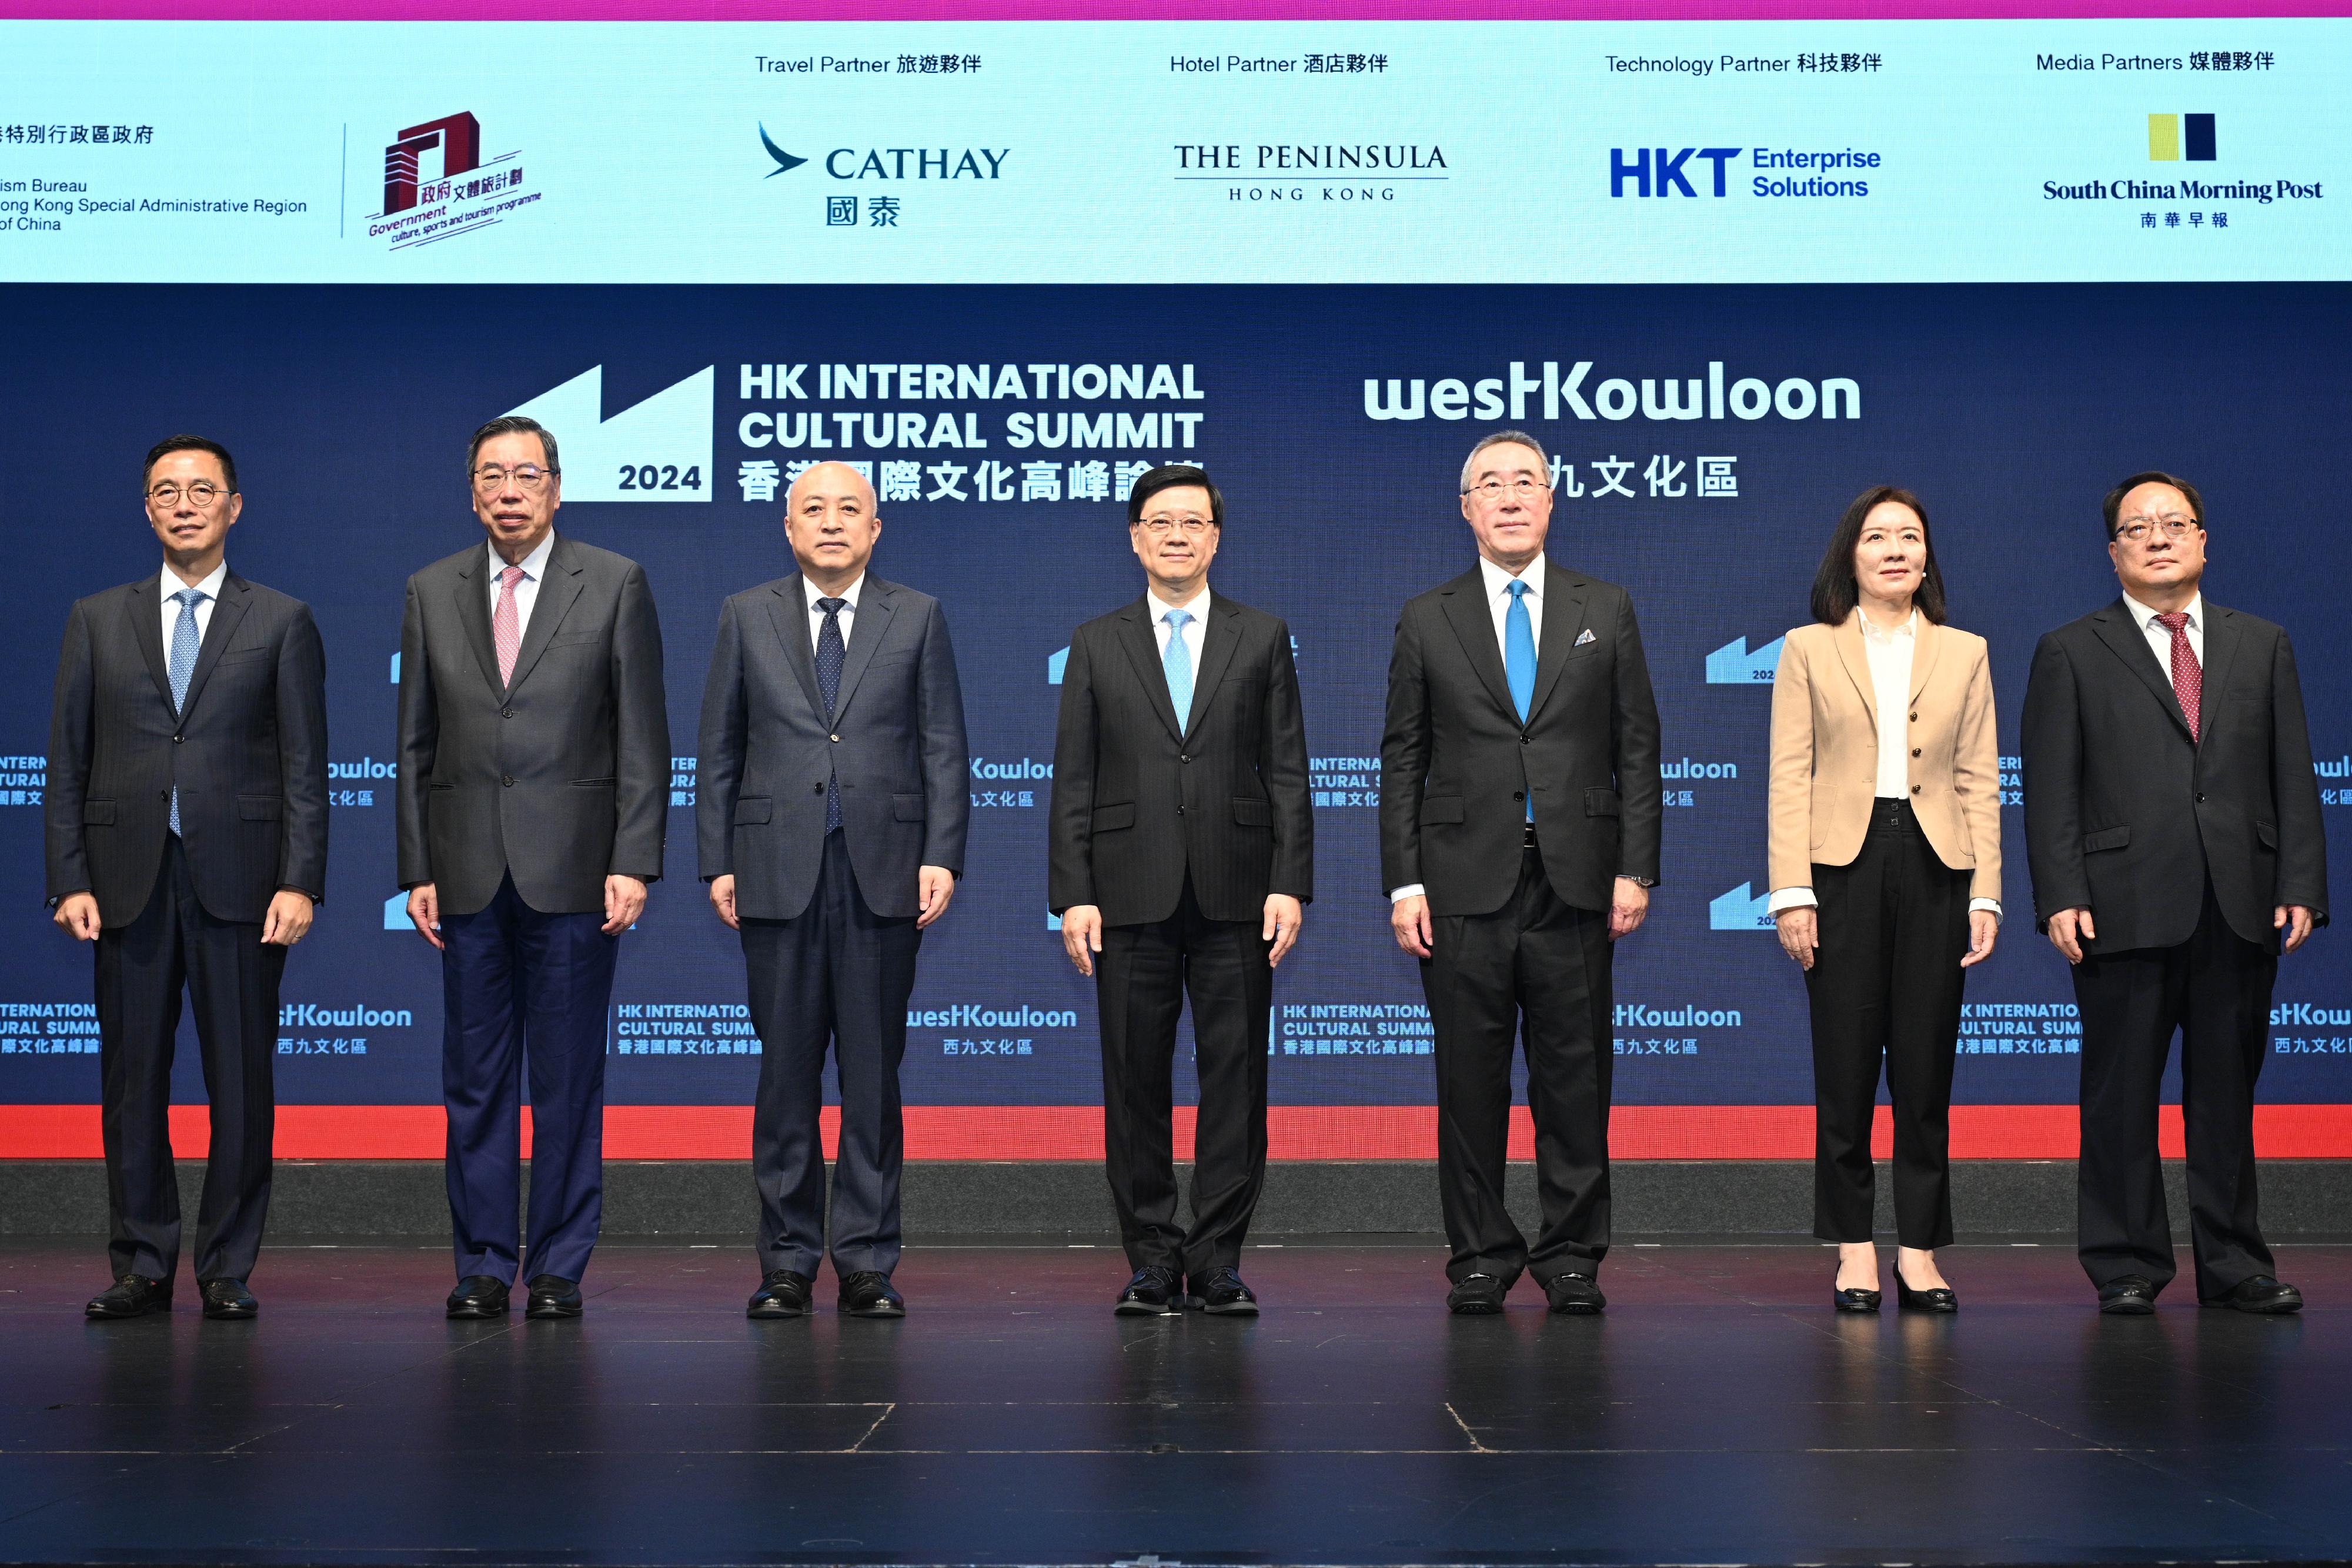 The West Kowloon Cultural District Authority (WKCDA) held the Hong Kong International Cultural Summit today (March 25). Photo shows (from left) the Secretary for Culture, Sports and Tourism, Mr Kevin Yeung; the President of the Legislative Council, Mr Andrew Leung; the Director of the Palace Museum, Dr Wang Xudong; the Chief Executive, Mr John Lee; the Chairman of the Board of the WKCDA, Mr Henry Tang; Deputy Director of the Liaison Office of the Central People's Government in the Hong Kong Special Administrative Region (HKSAR) Ms Lu Xinning; and Deputy Commissioner of the Office of the Commissioner of the Ministry of Foreign Affairs of the People's Republic of China in the HKSAR Mr Pan Yundong at the summit. 